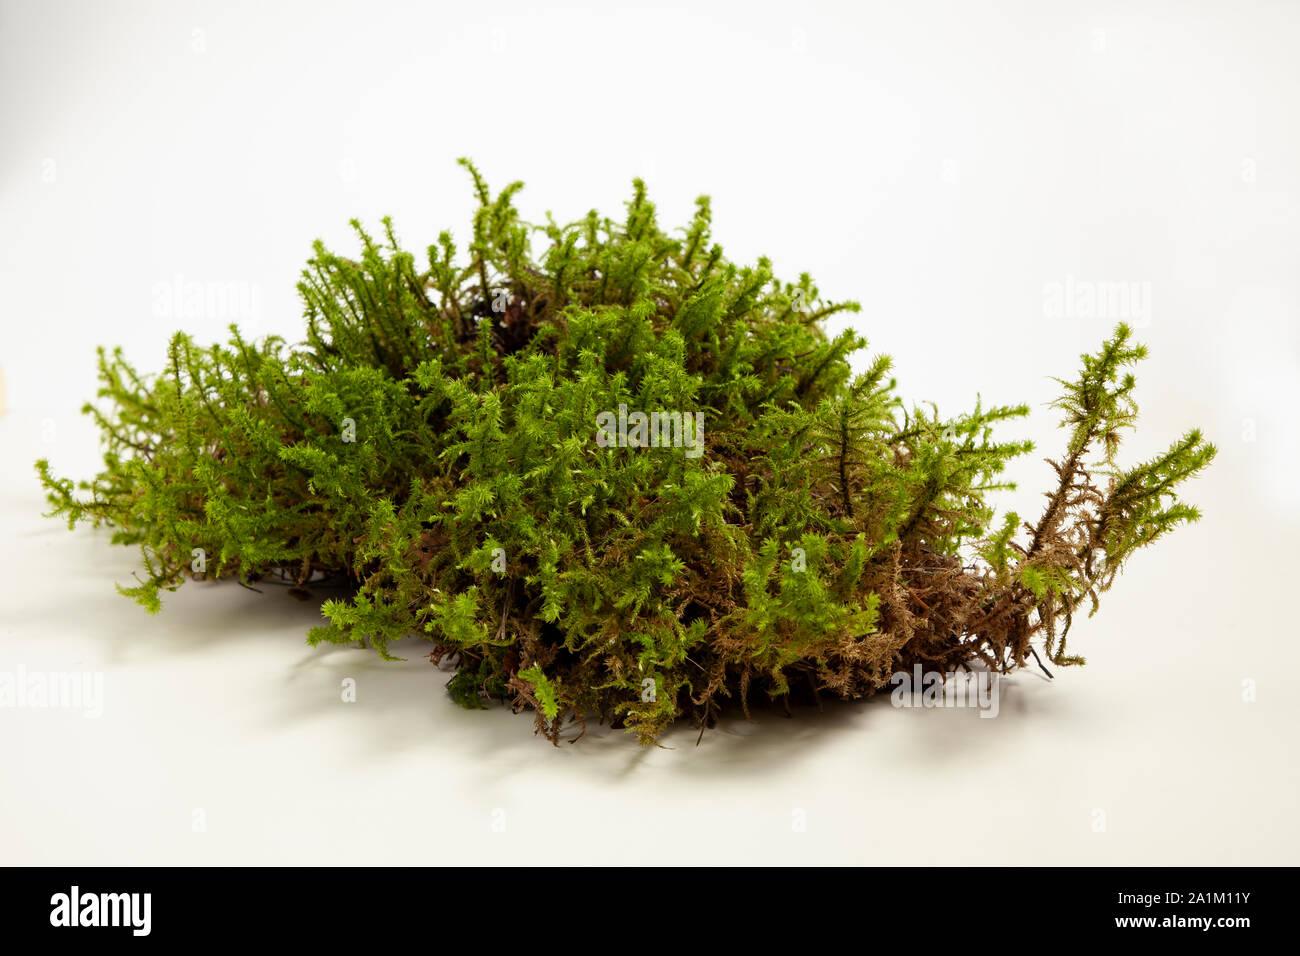 moss-isolated-on-a-white-background-2A1M11Y.jpg